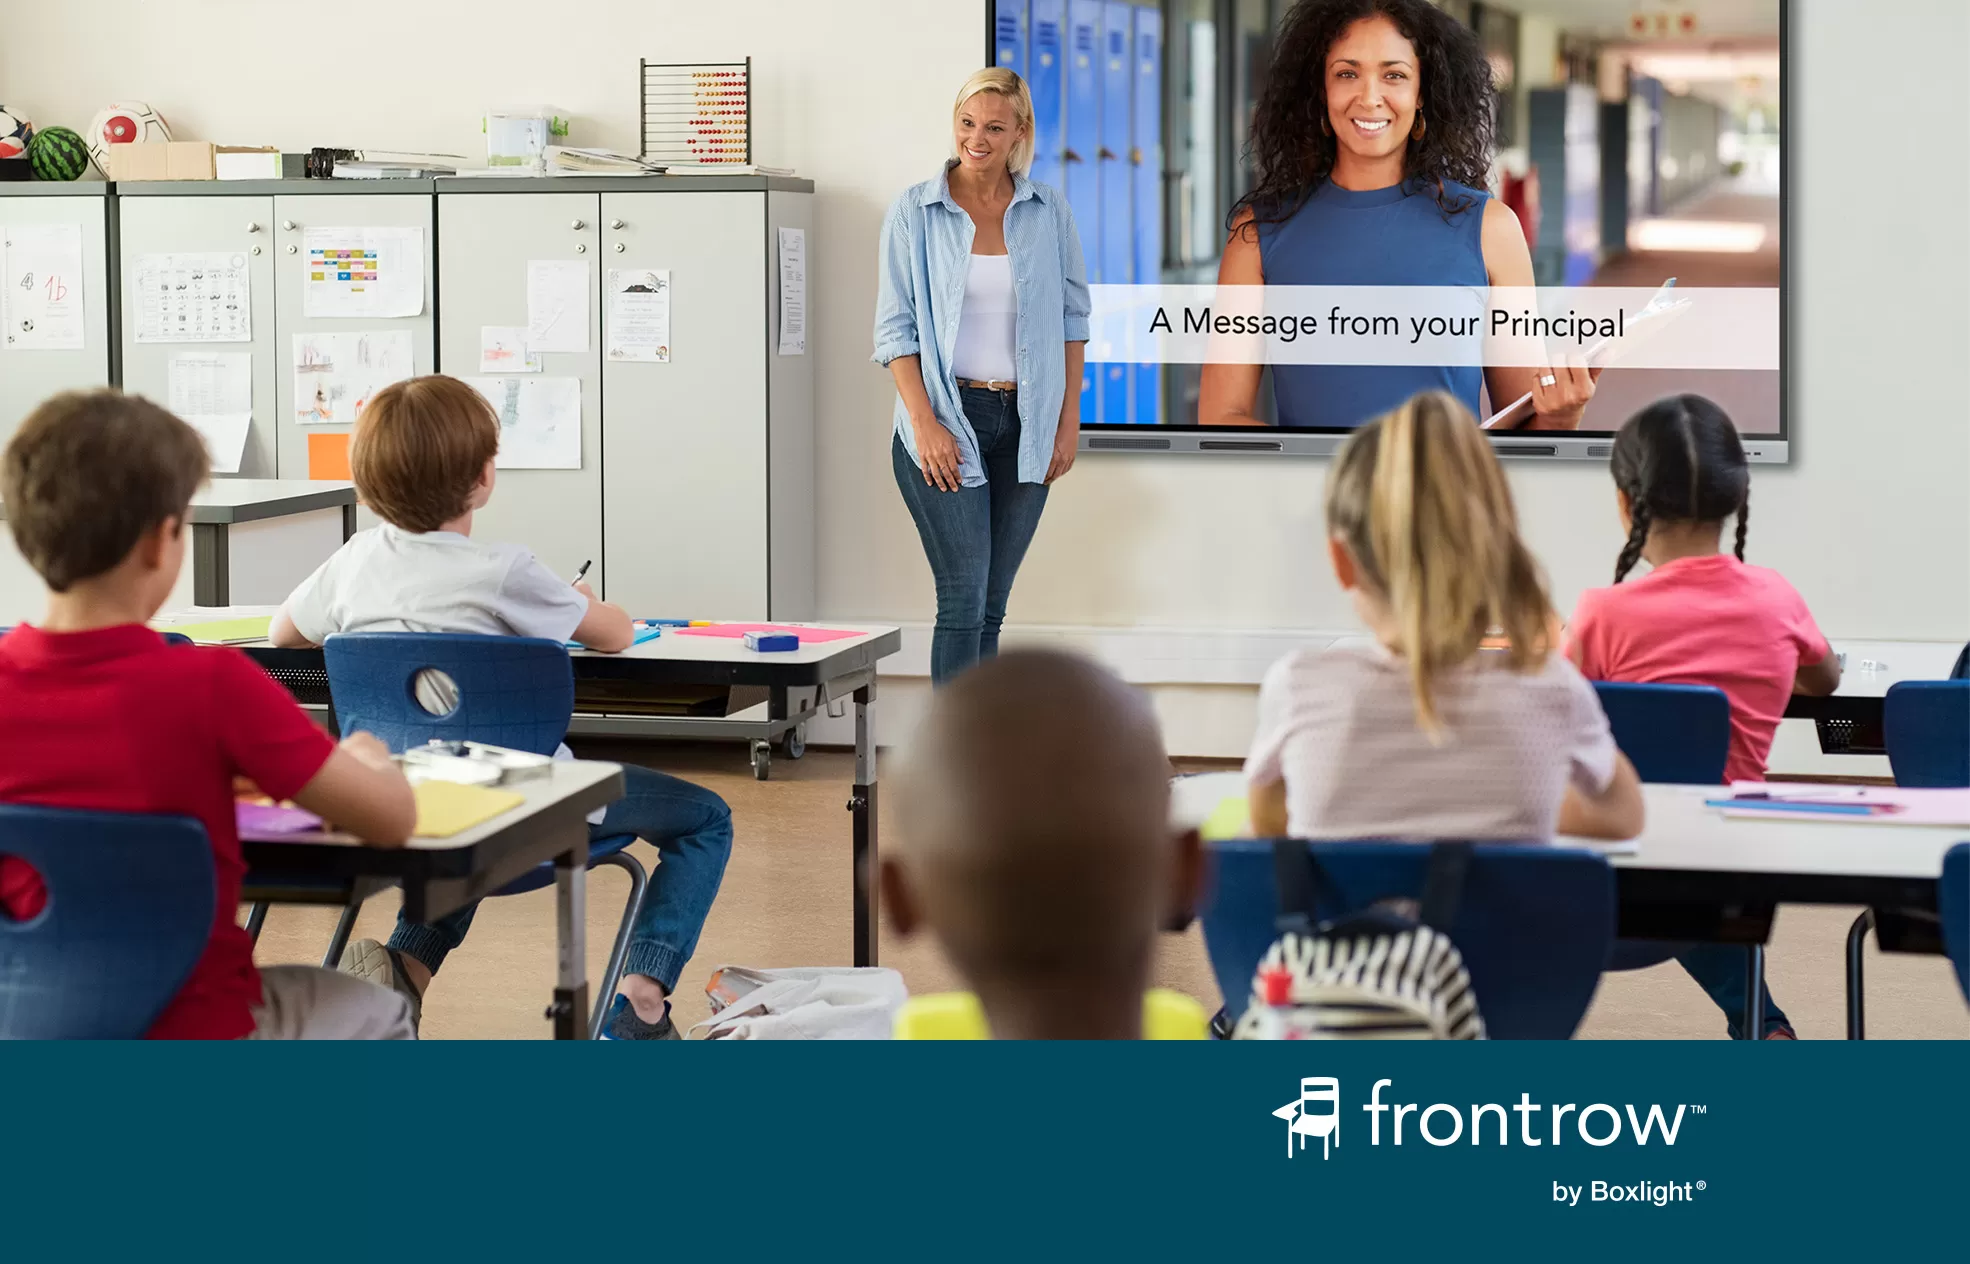 attention! used in a classroom to share a message from the principal with a blue banner saying 'FrontRow by Boxlight' across the bottom